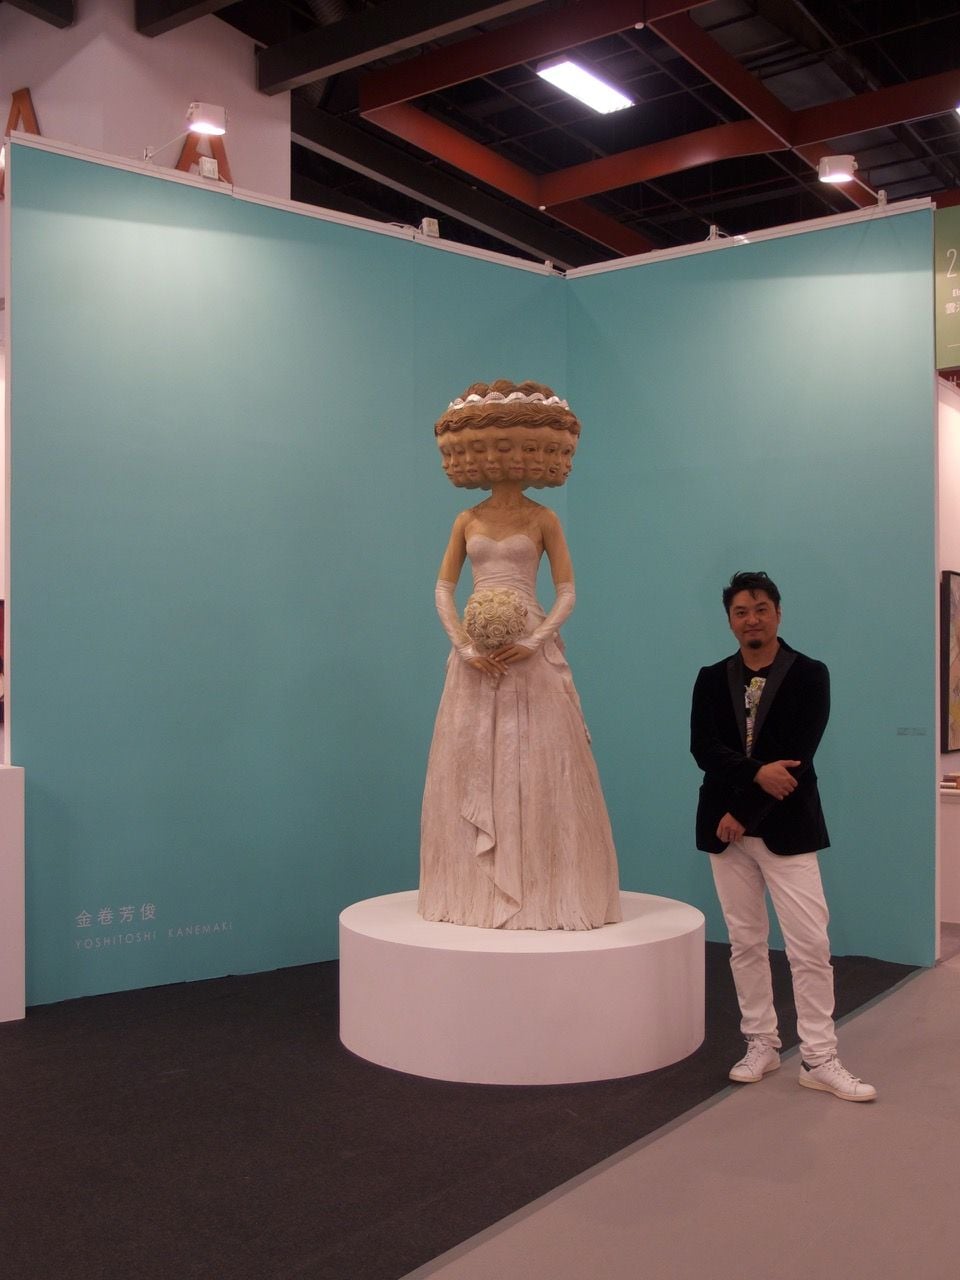 Artist Yoshitoshi Kanemaki stands next to one of his surreal hand-carved sculptures.